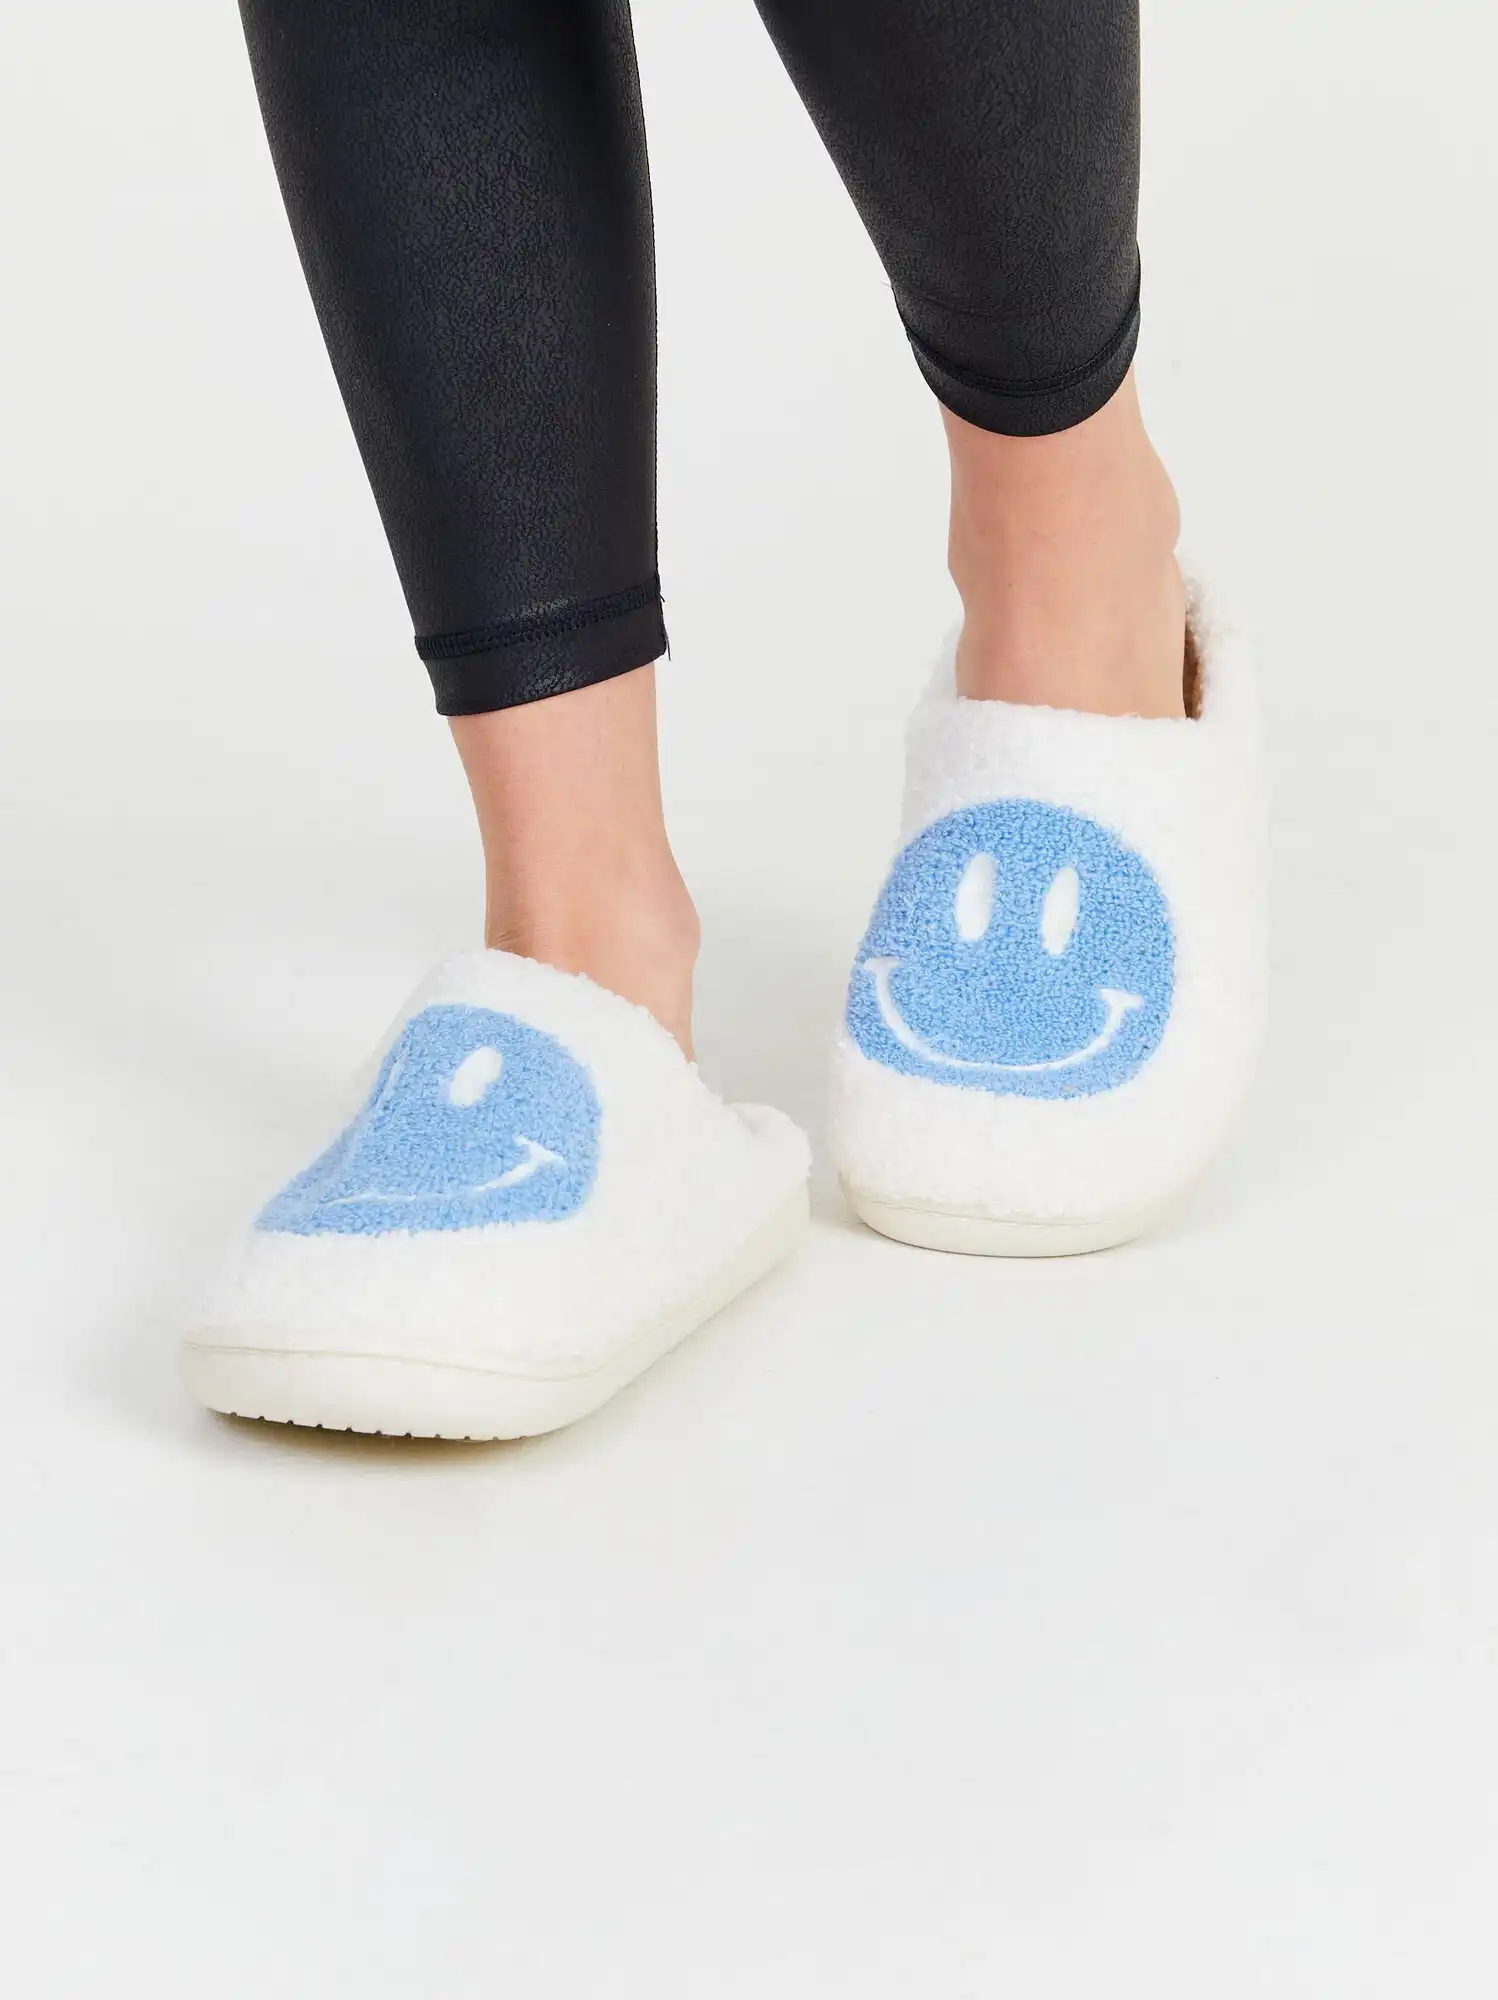 White Slippers with Blue Smiley Face